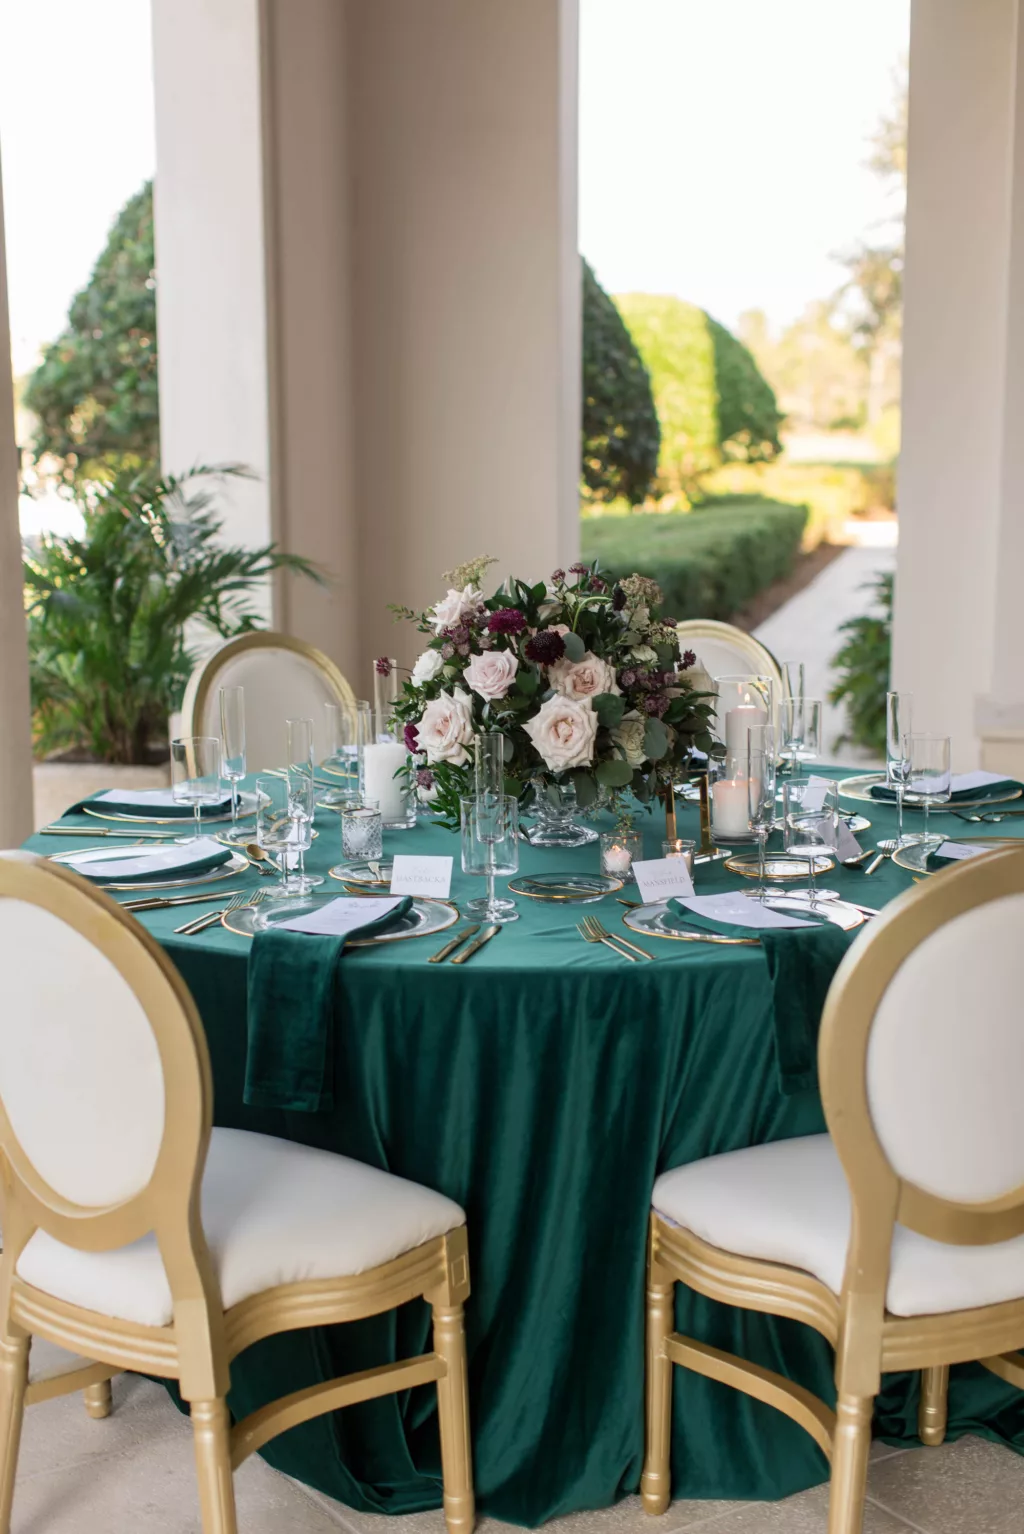 Elegant Fall Inspired White Roses, Pink Roses, Hydrangeas, Purple Chrysanthemums, and Greenery Centerpiece Decor Ideas | Emerald and Gold Wedding Reception Inspiration | Tampa Bay Florist Bruce Wayne Florals | Planner Parties A' La Carte